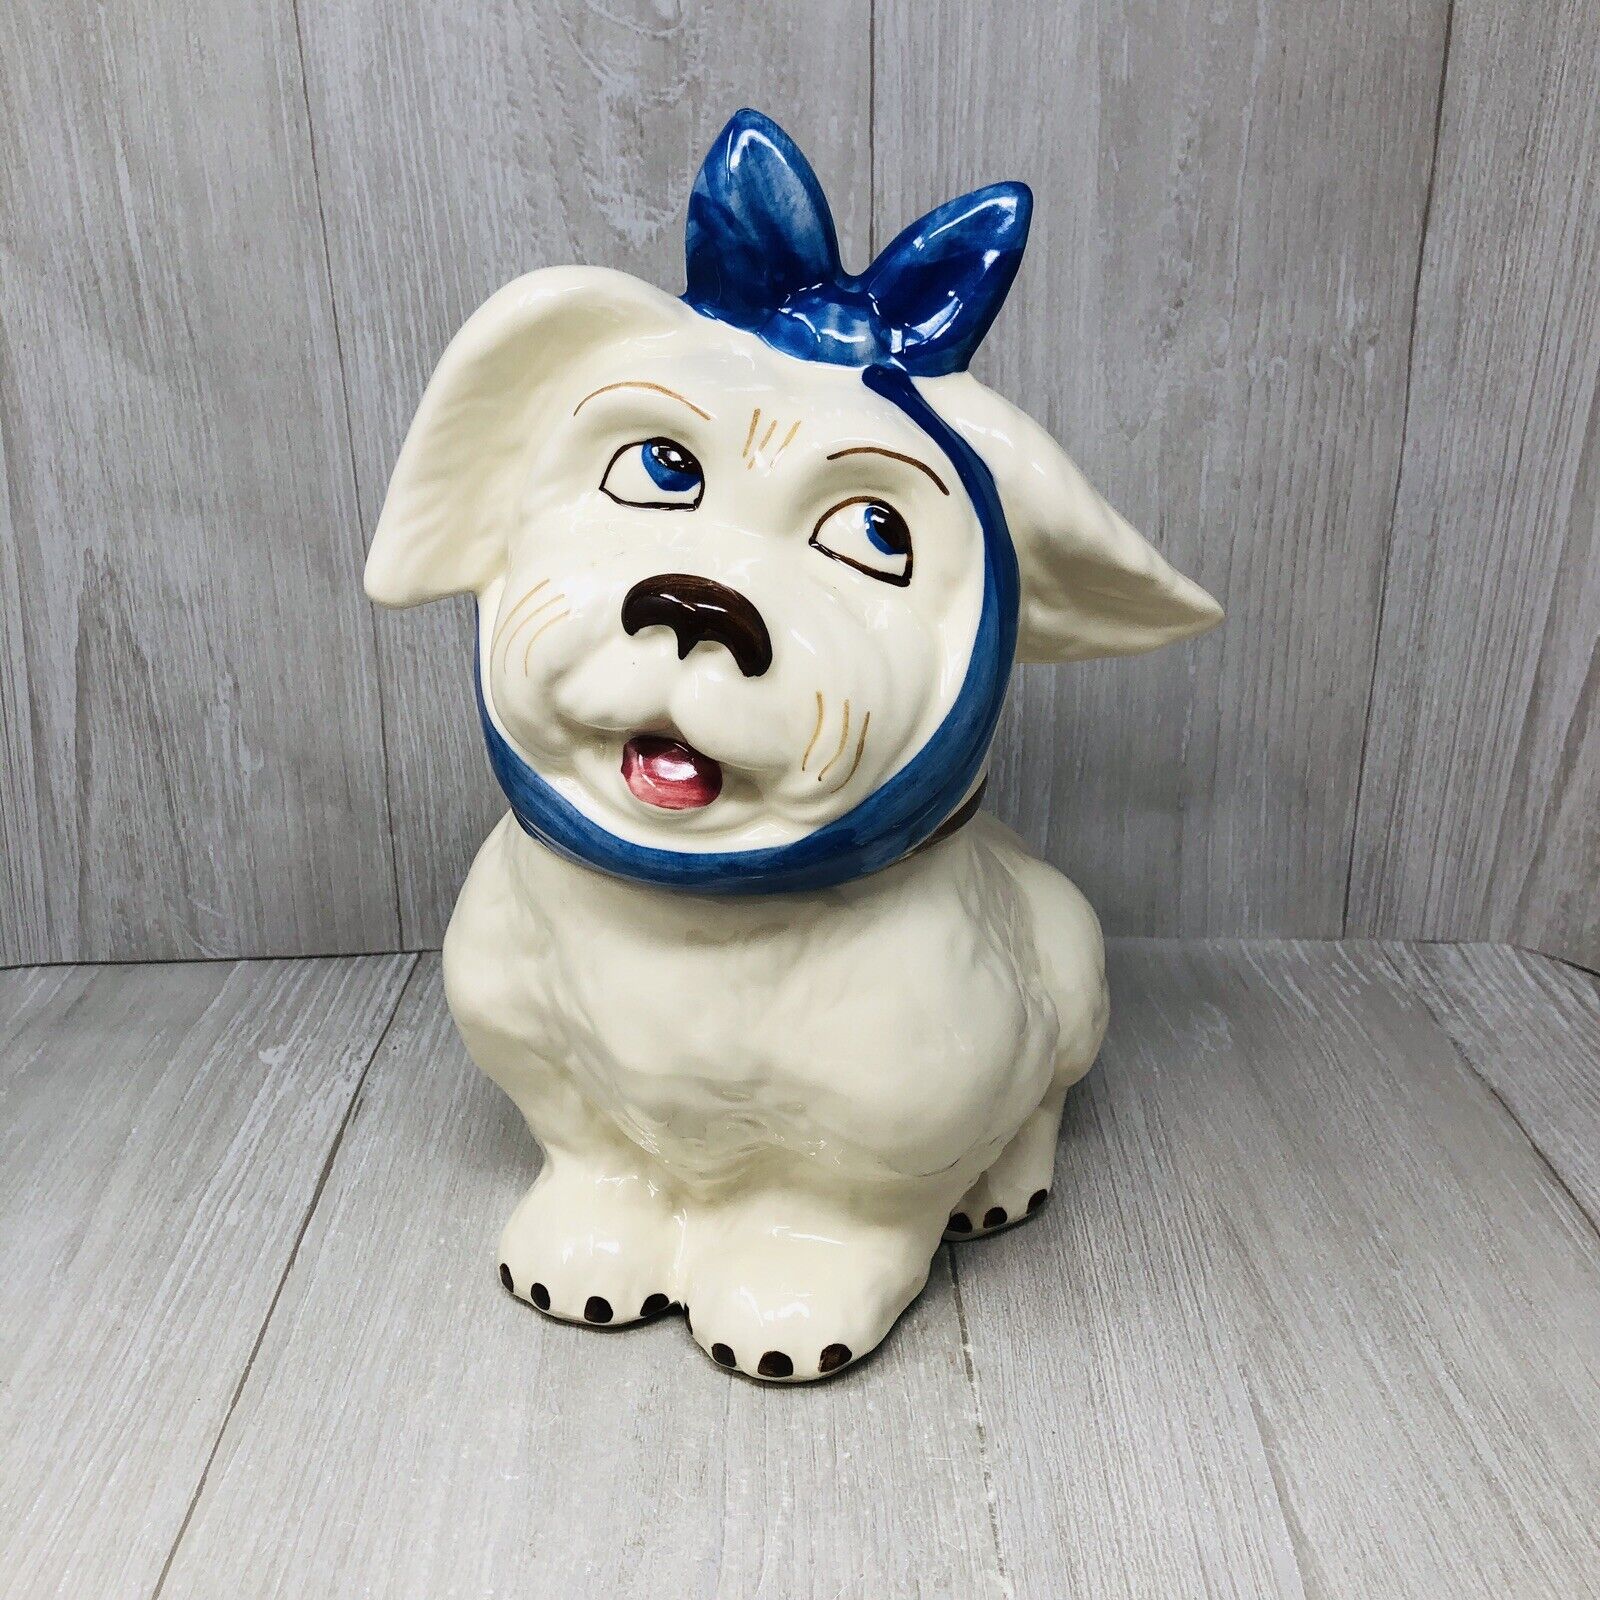 Vintage Shawnee Pottery Cookie Jar MUGGSY Dog with Blue Bow Toothache